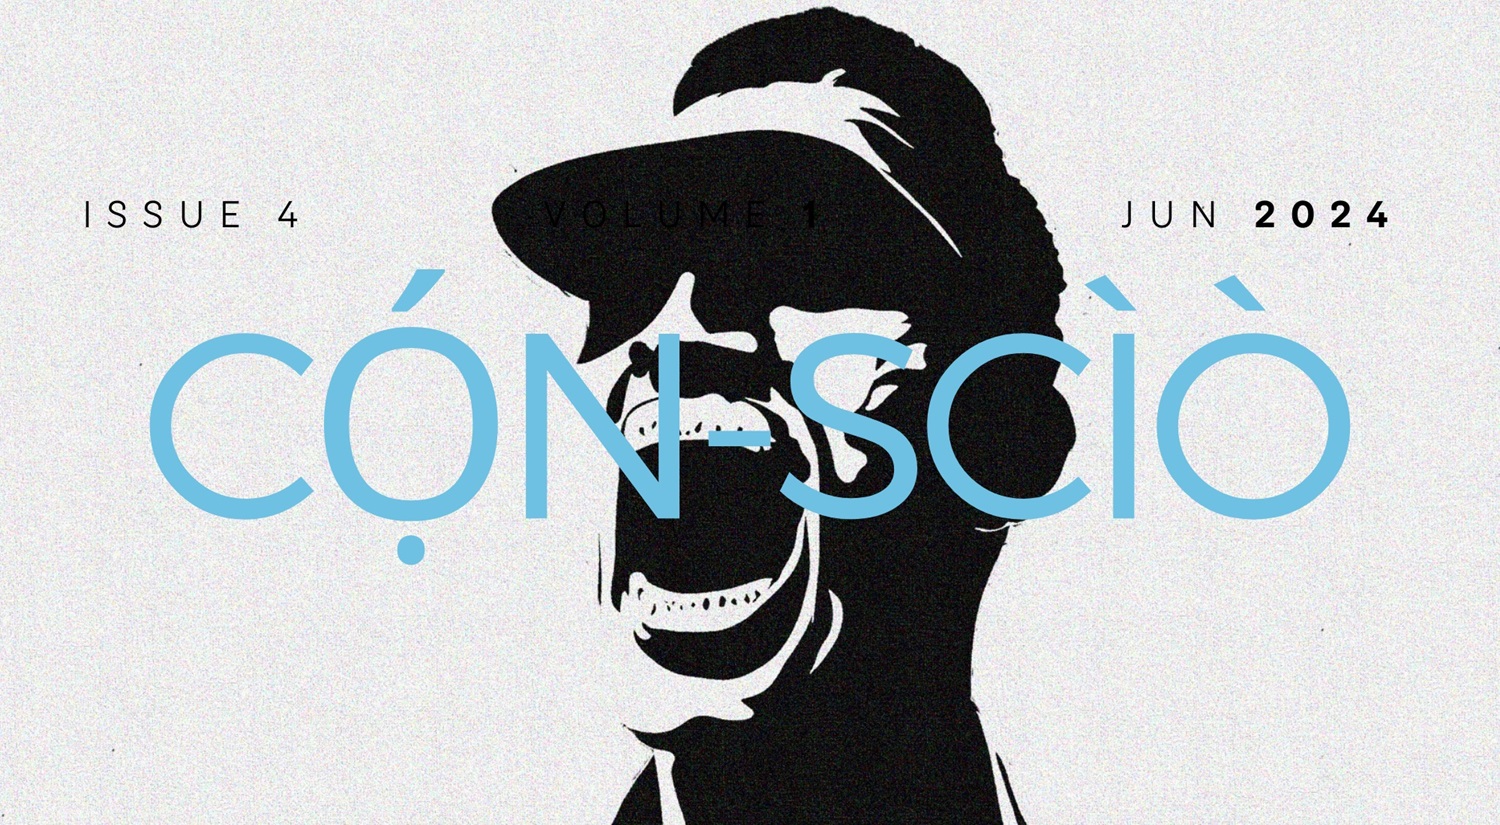 CALL FOR SUBMISSIONS: ‘PARRHESIA’ — CỌ́N-SCÌÒ MAGAZINE ISSUE 4, VOL 1, JUNE 2024